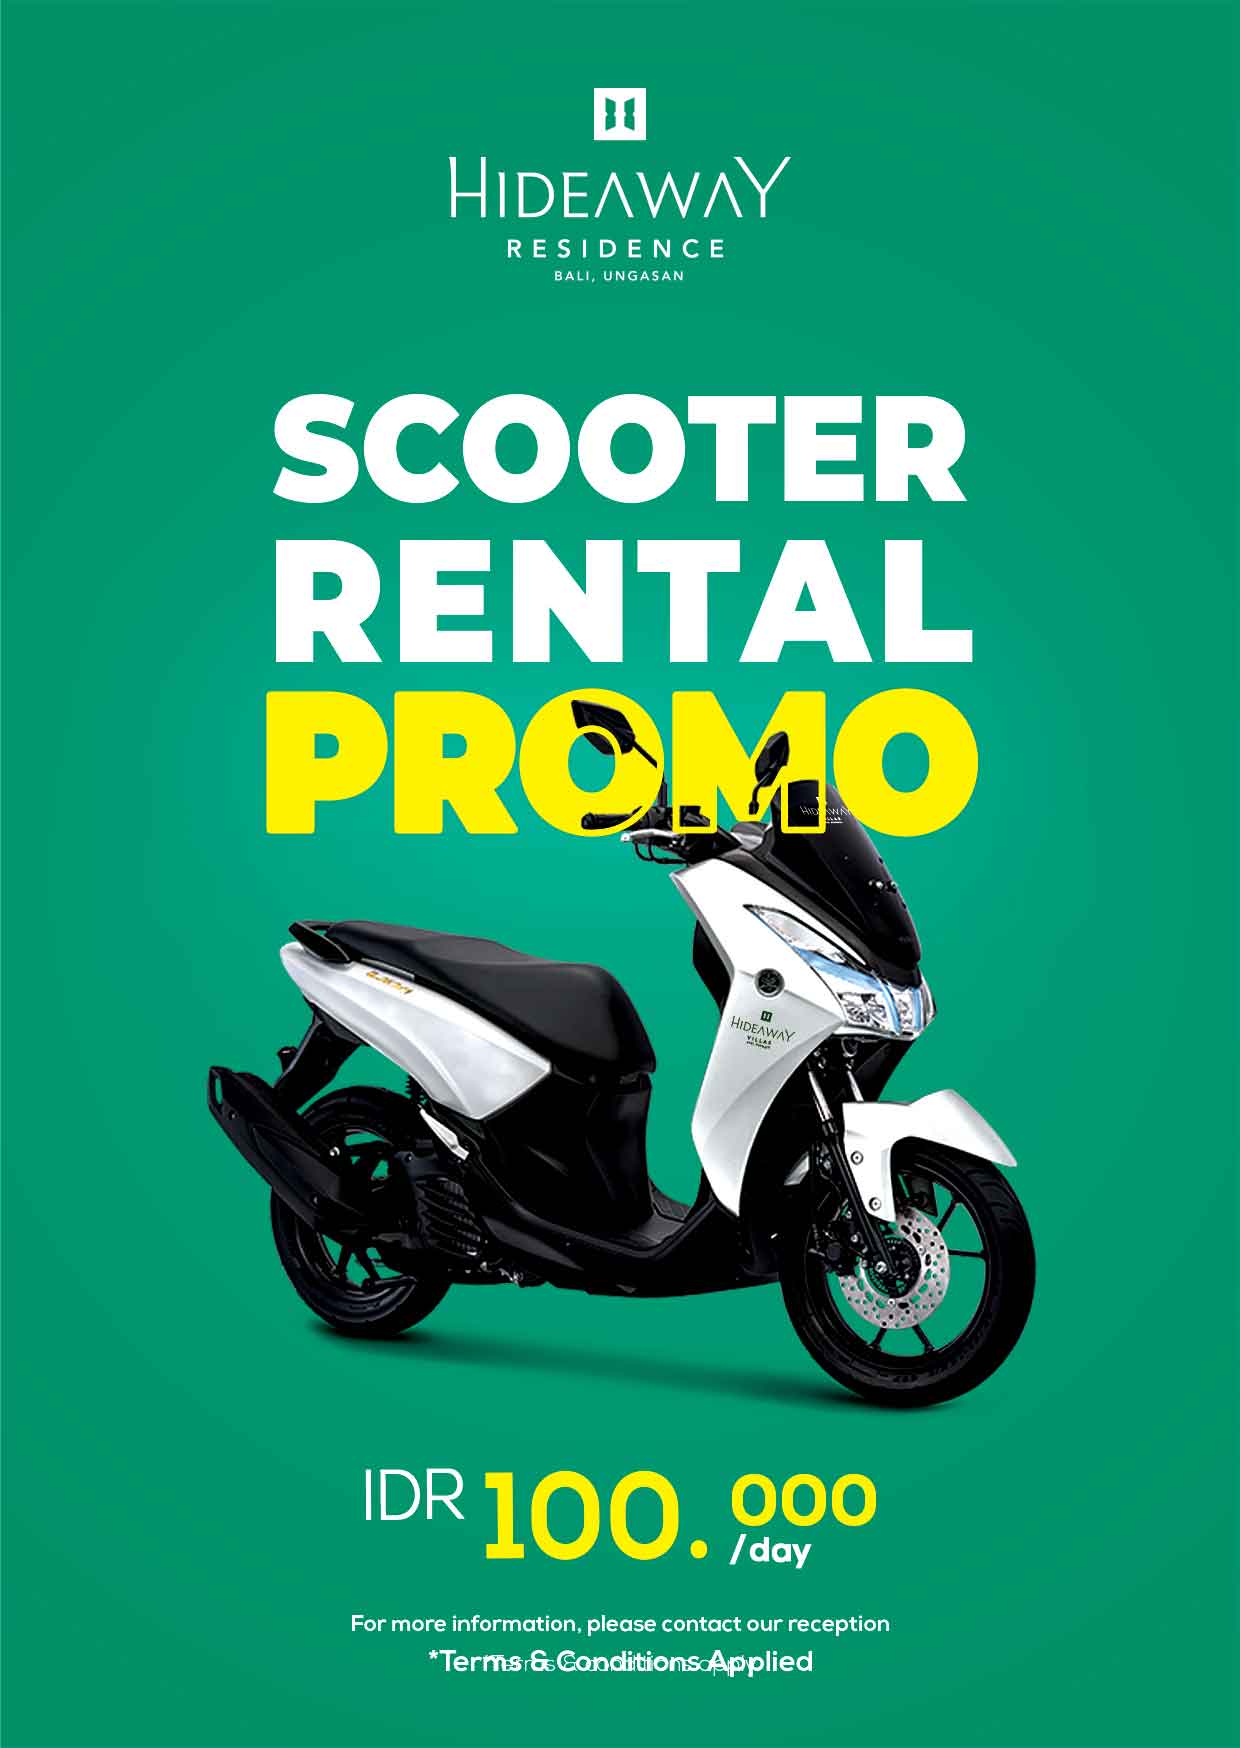 Res_Scooter_Rental_HR_A5jpg